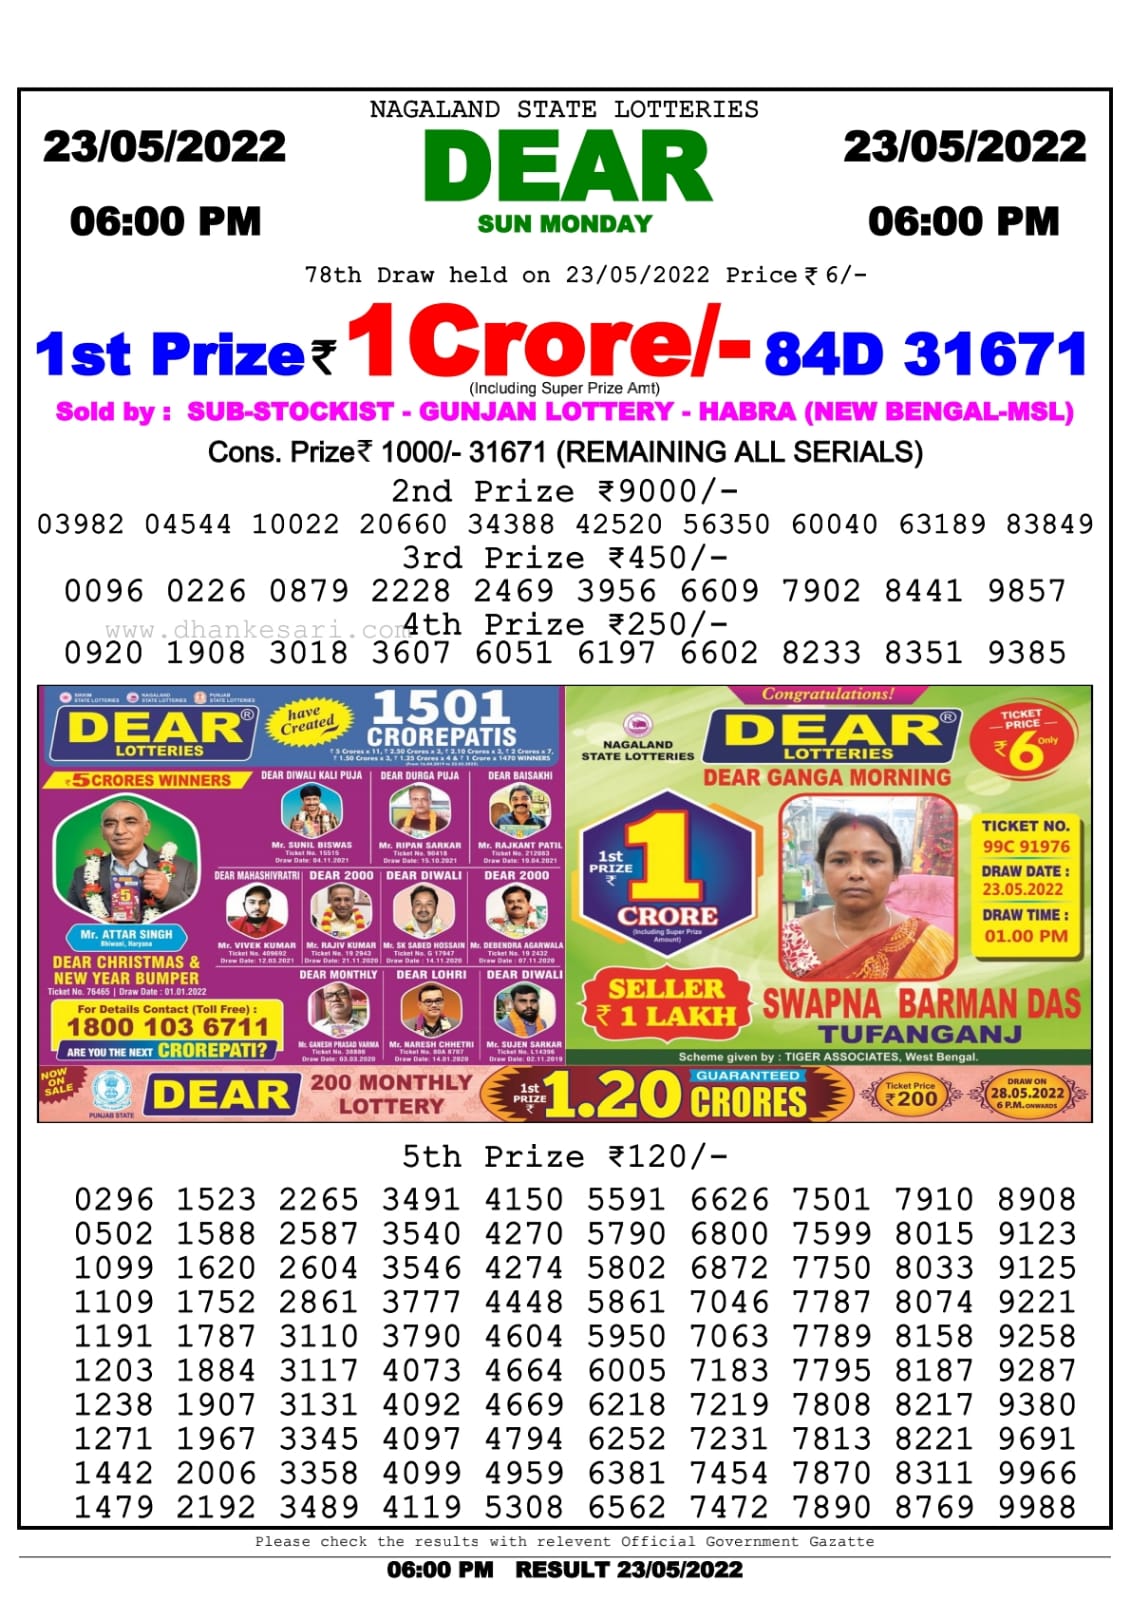 Dear Lottery Nagaland state Lottery Results 06.00 pm 23.05.2022